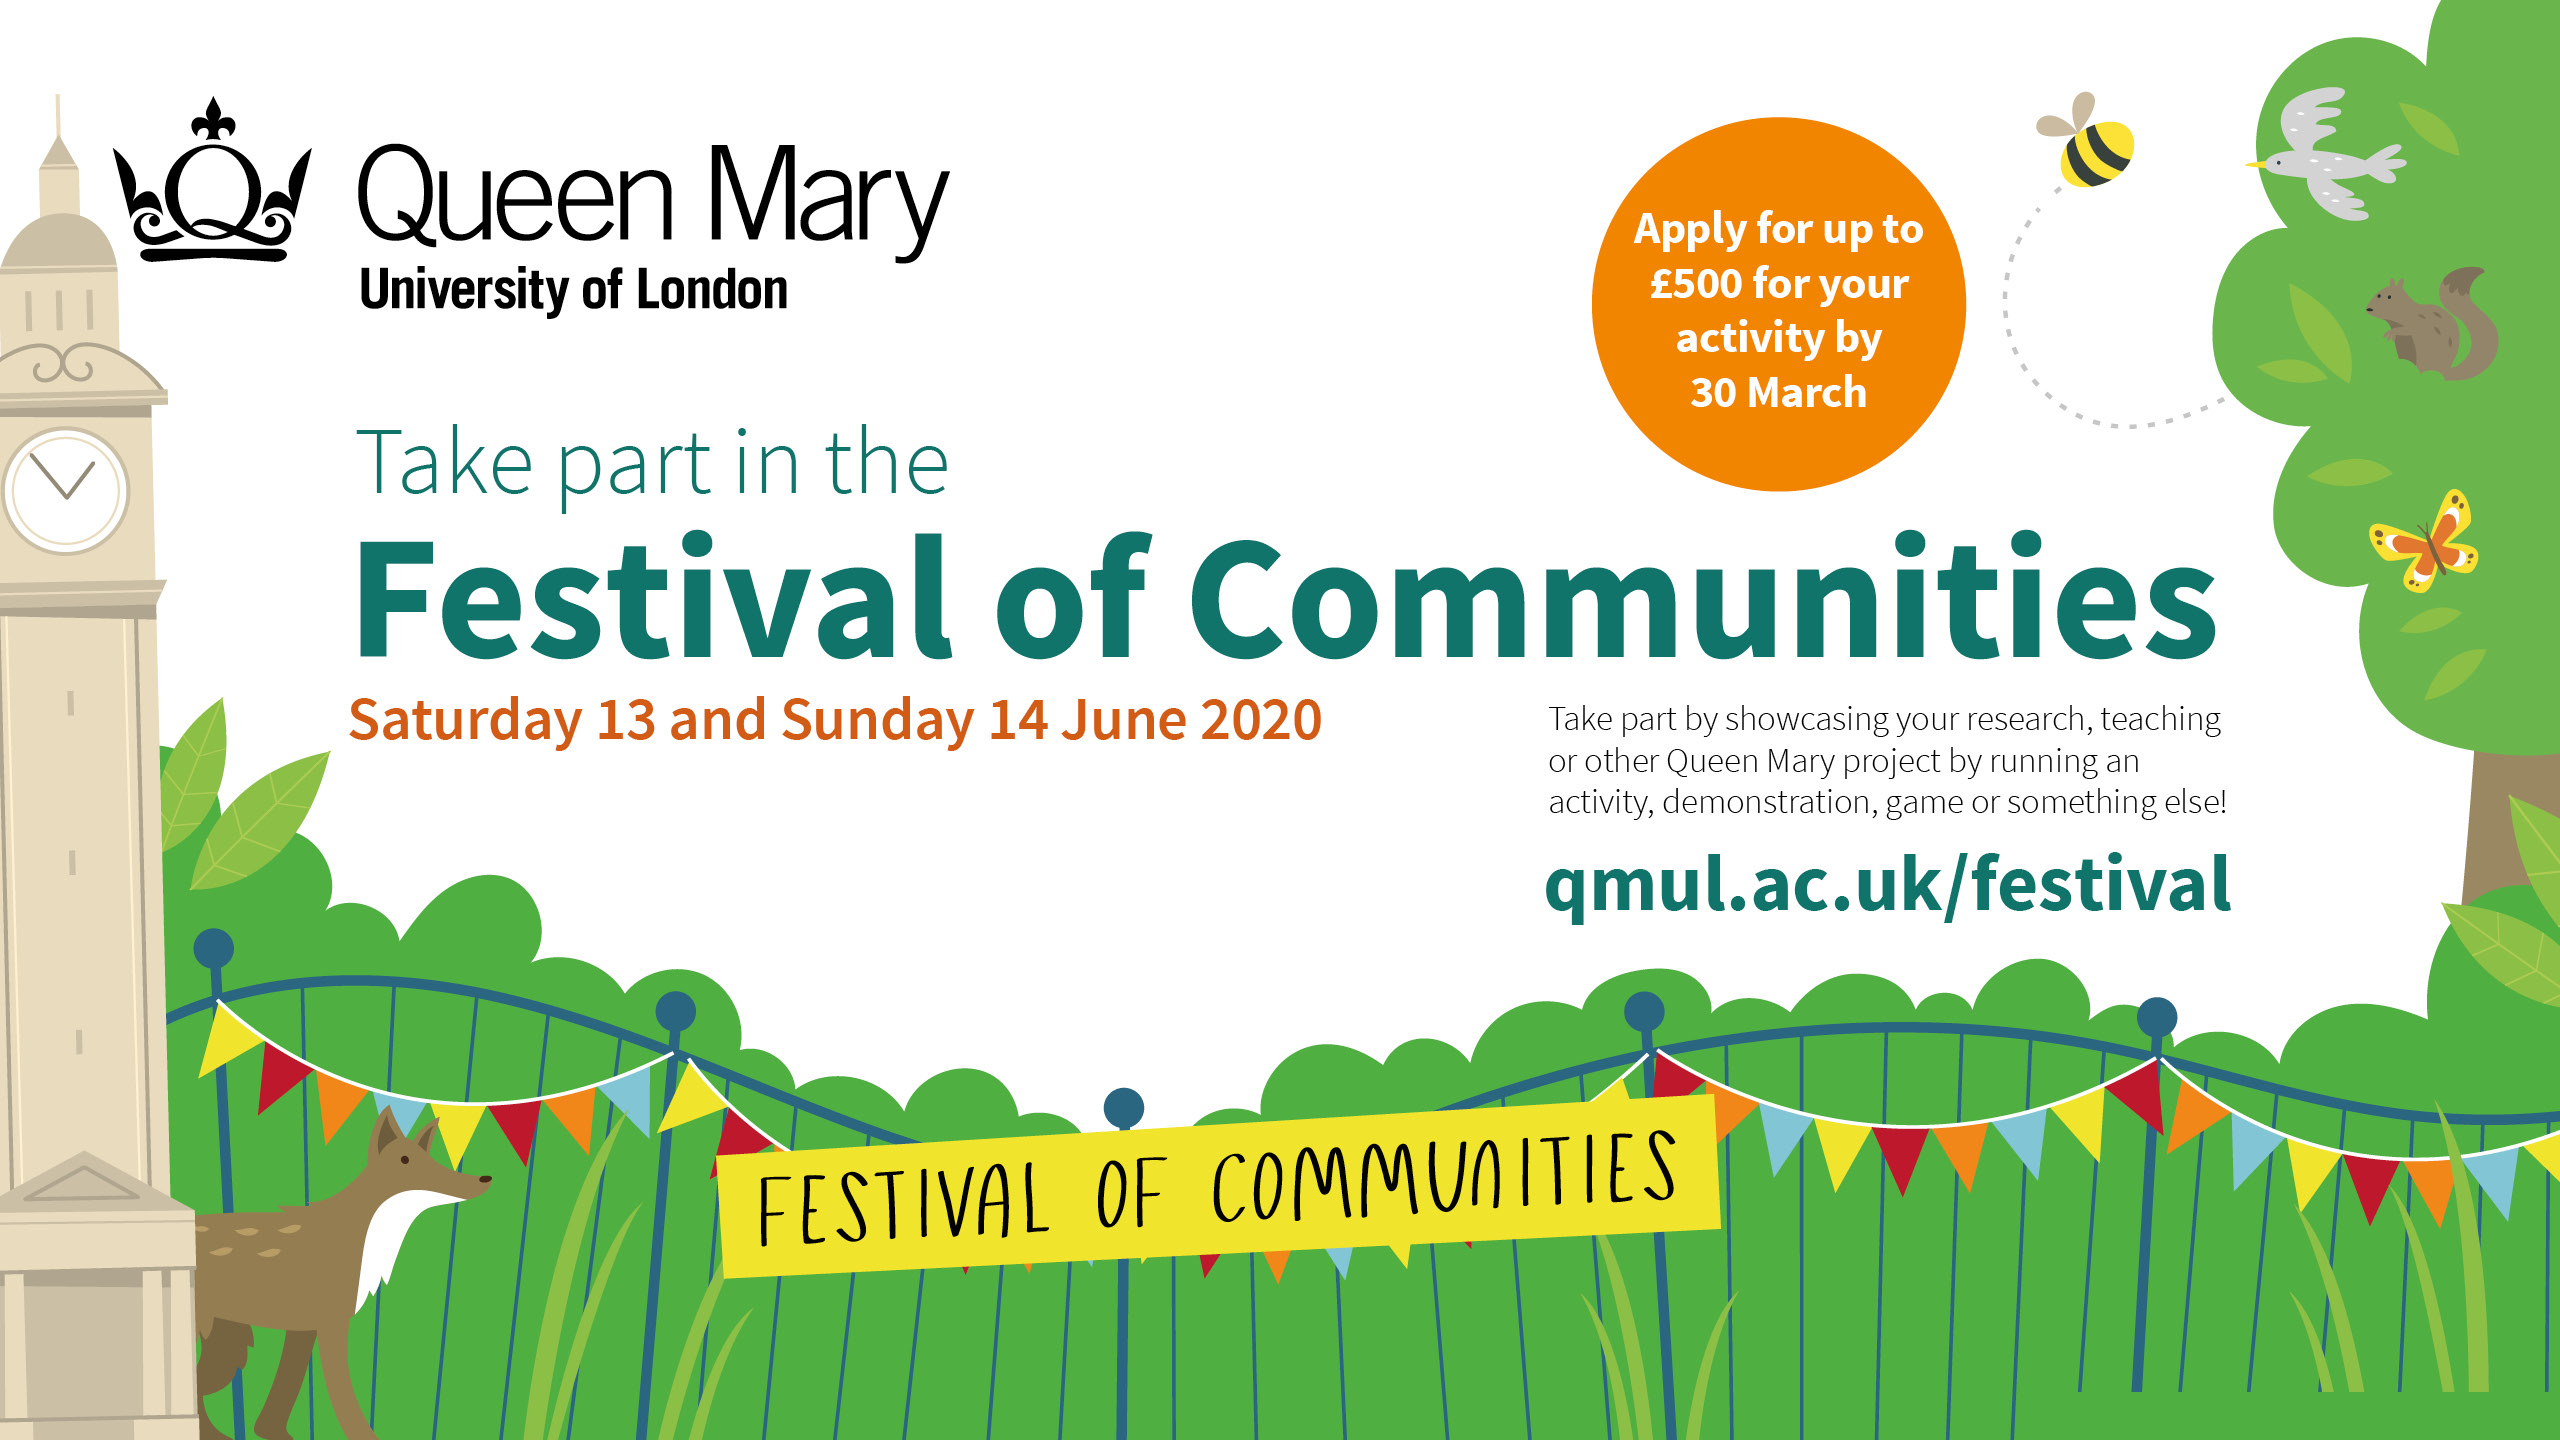 Details for 2020 Festival of Communities event at Queen Mary